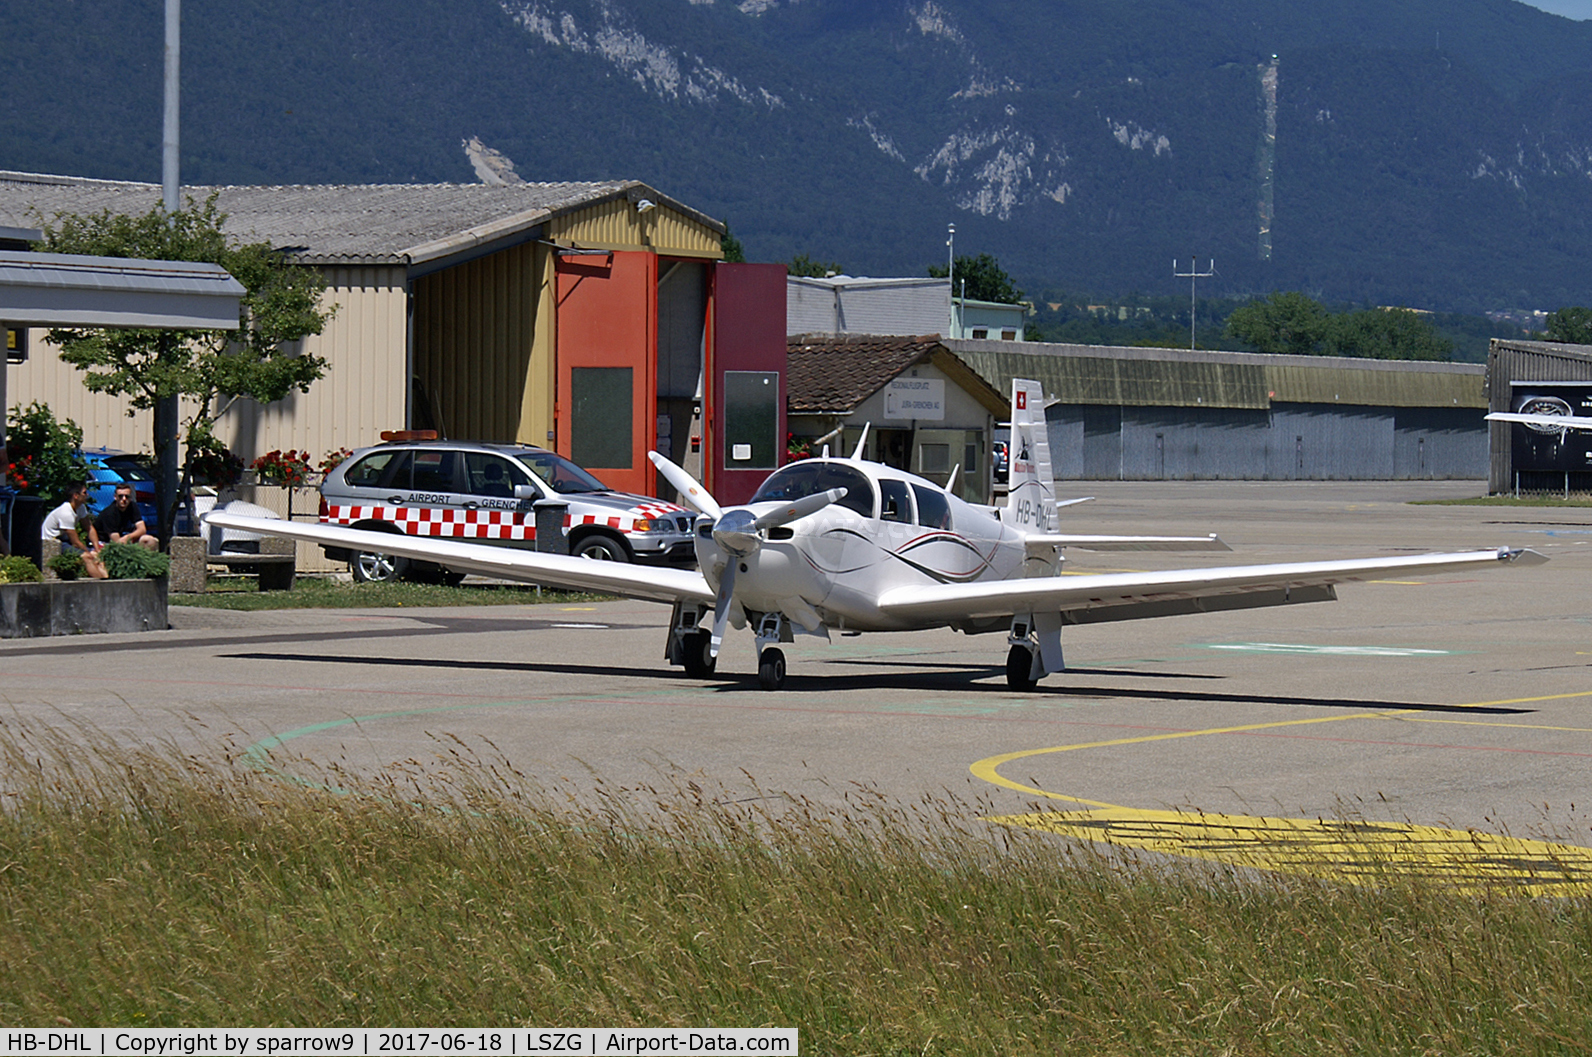 HB-DHL, 1988 Mooney M20J 201 C/N 24-1685, Parked at Grenchen.